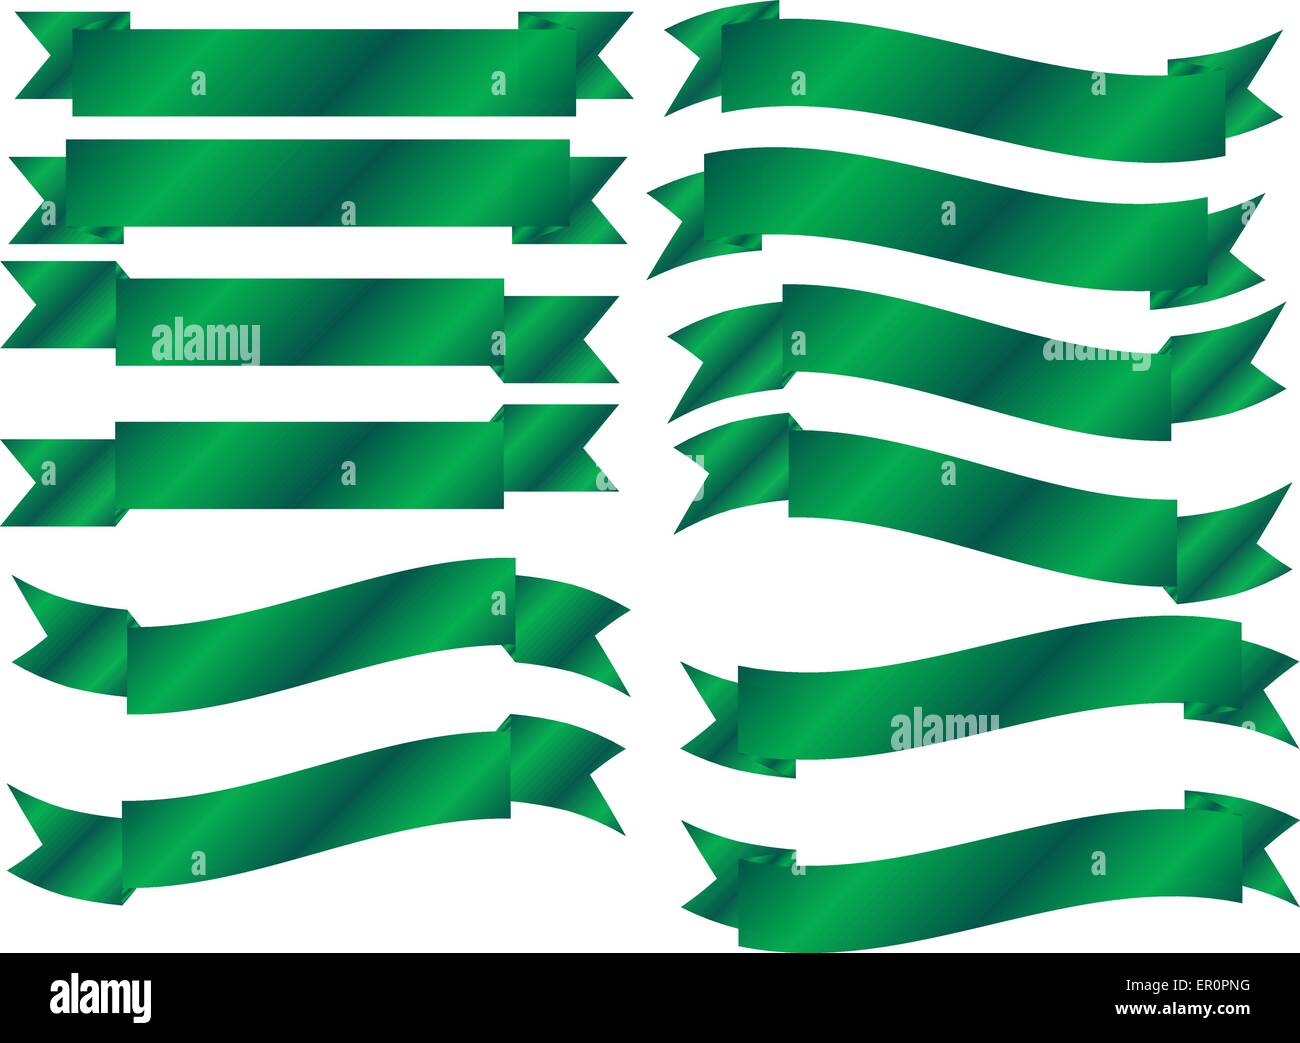 Set of 12 Green Banners Stock Vector